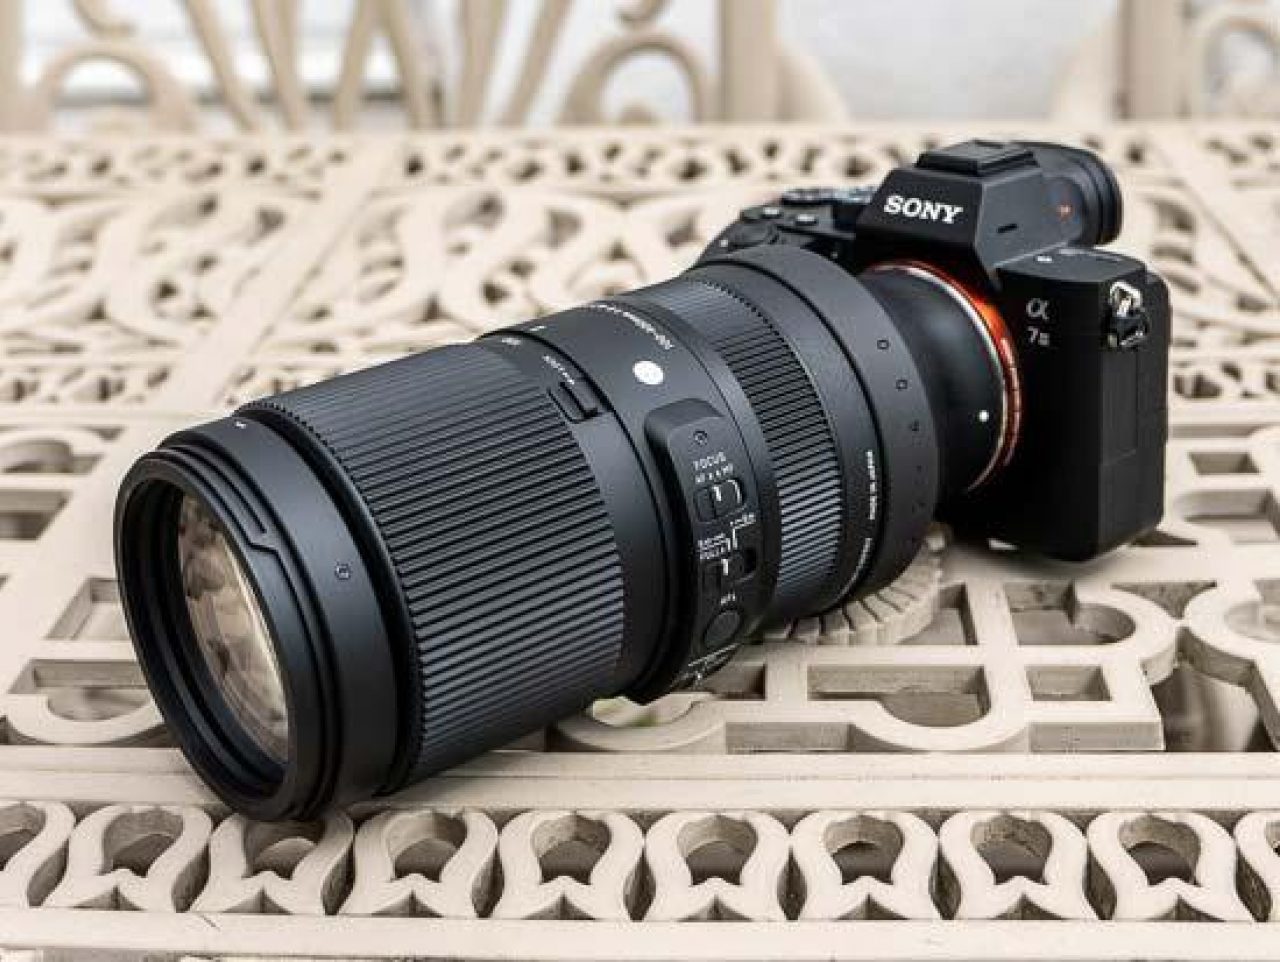 Sigma 100-400mm F5-6.3 DG DN OS Review | Photography Blog